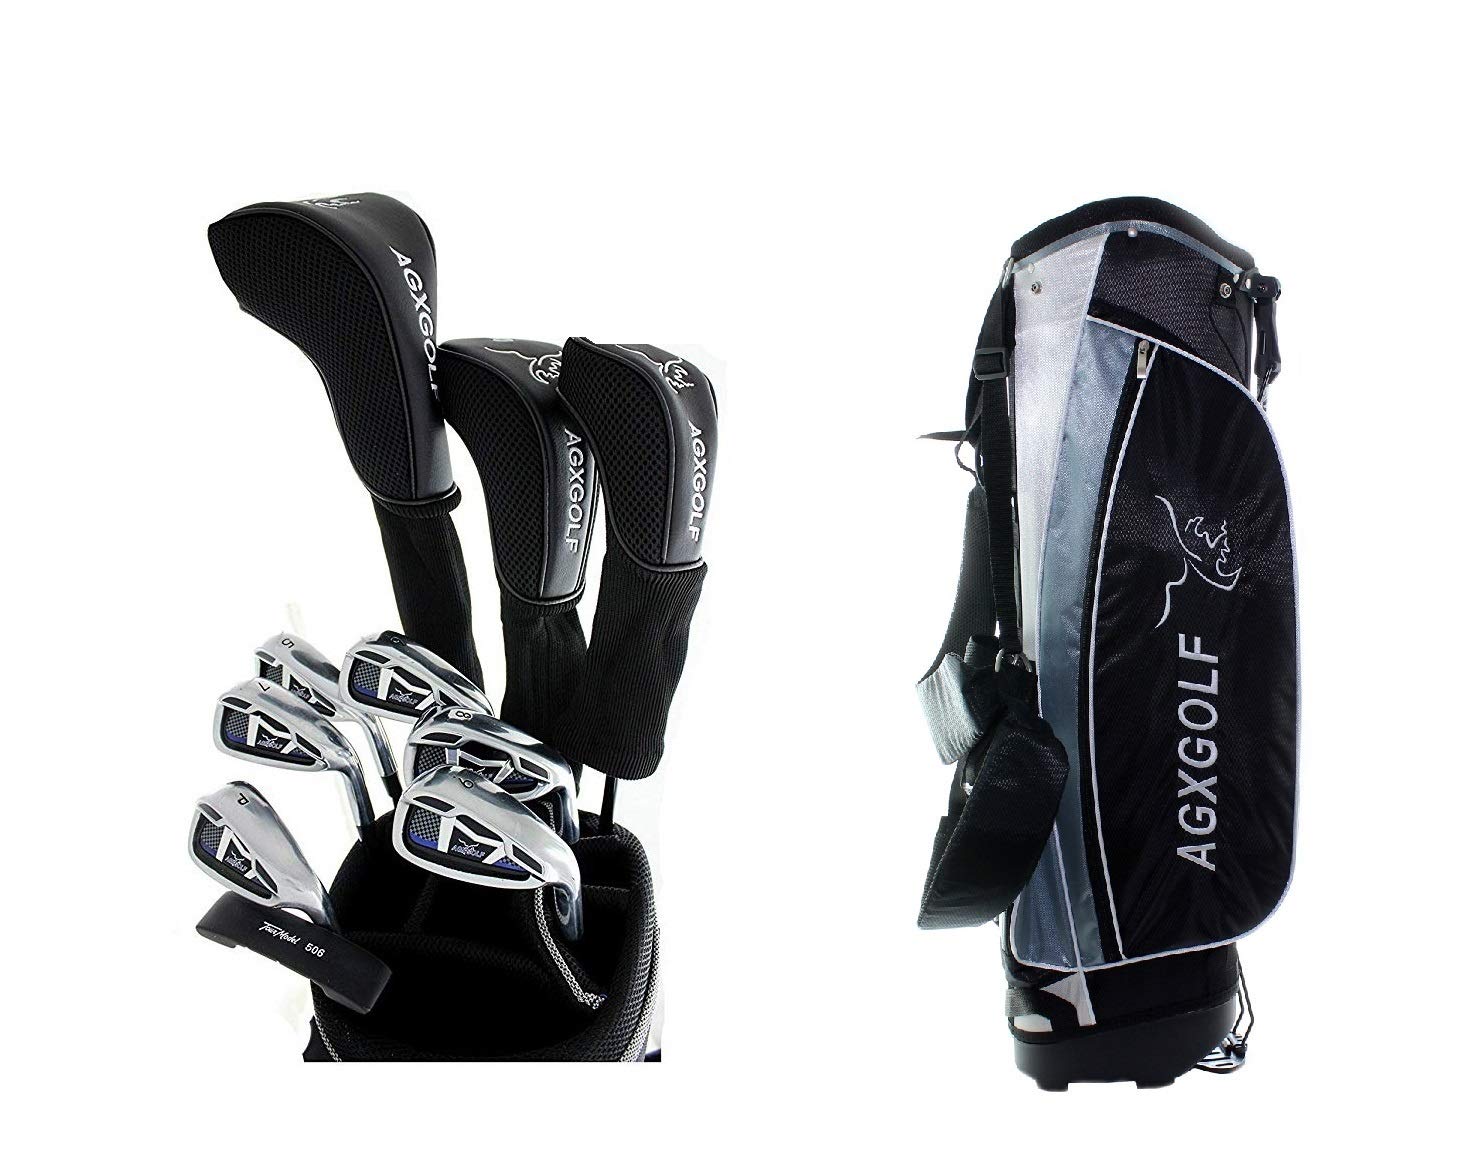 Mua AGXGOLF Senior Men's XLT Graphite Edition Complete Golf Club Set  w/Stand Bag, 460cc Driver, 3 Wood, Hybrid, 5-9 Irons, Wedge: Right Hand  Cadet, Regular or Tall Lengths: Built in The USA!